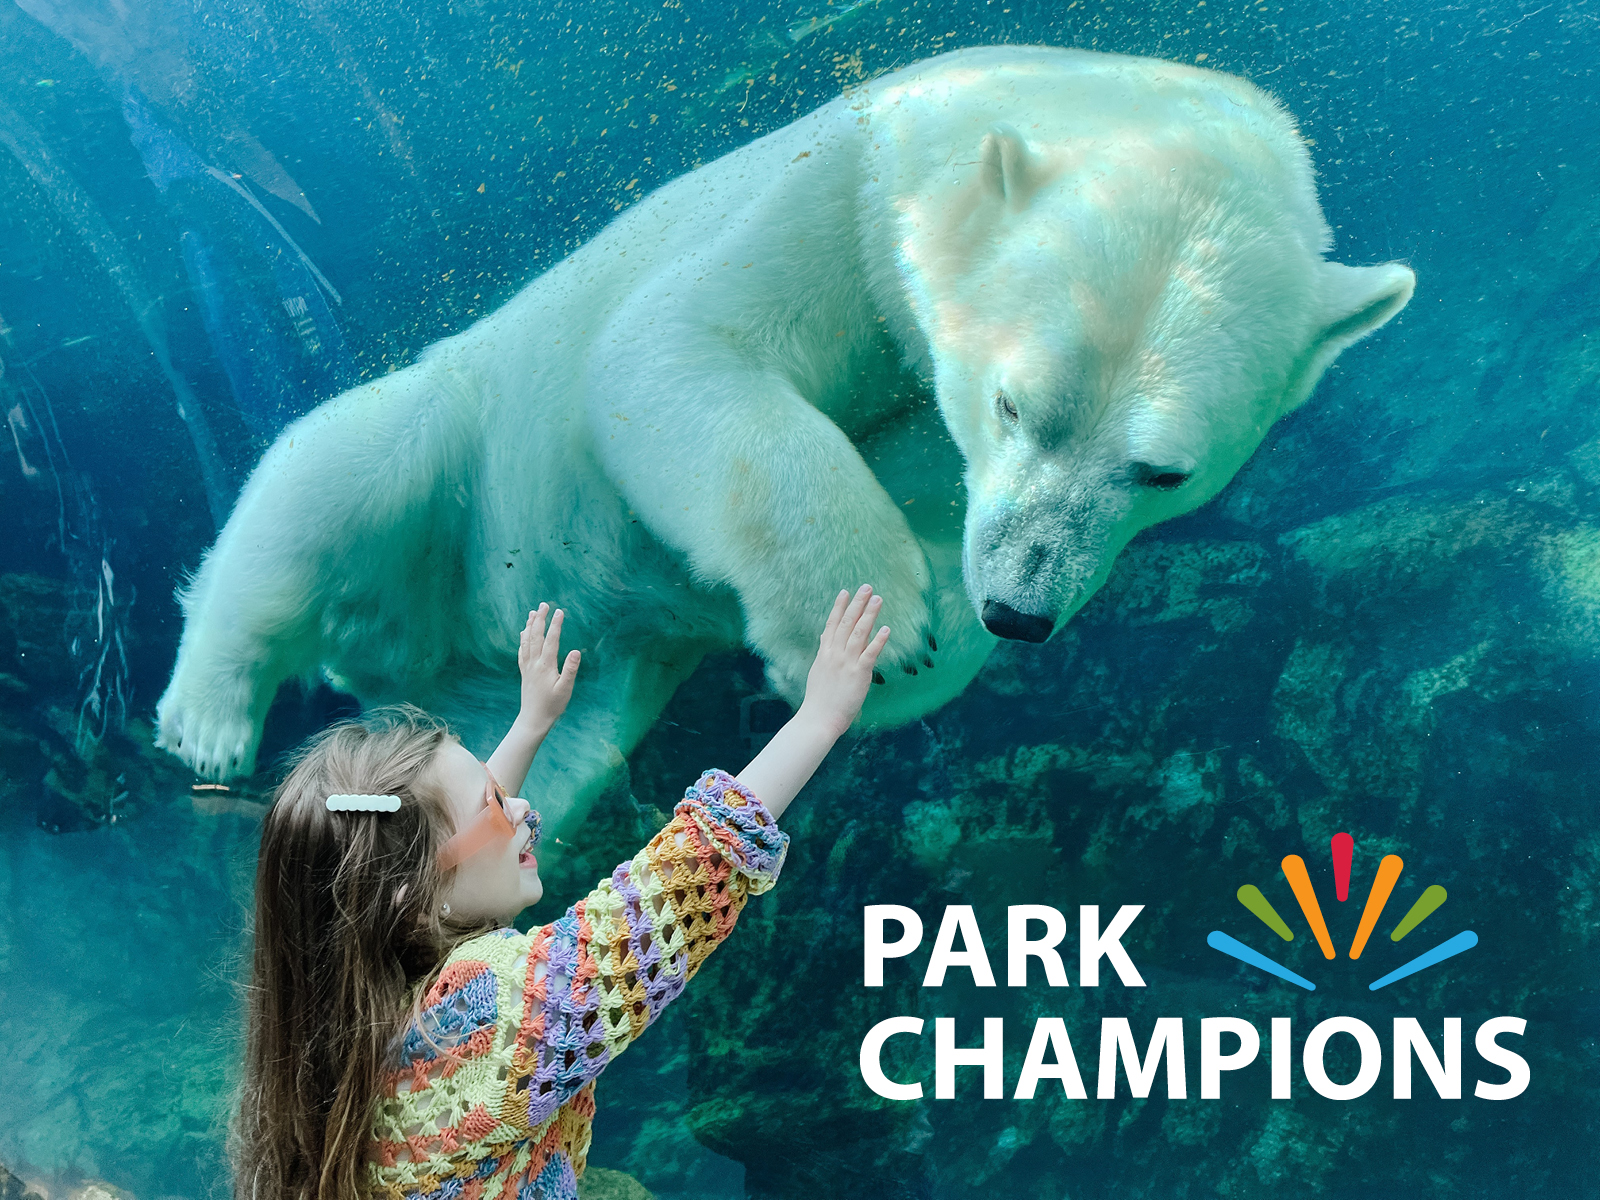 young girl reaches up towards a polar bear swimming above her head. A 'Park Champions" logo sits in the bottom right corner